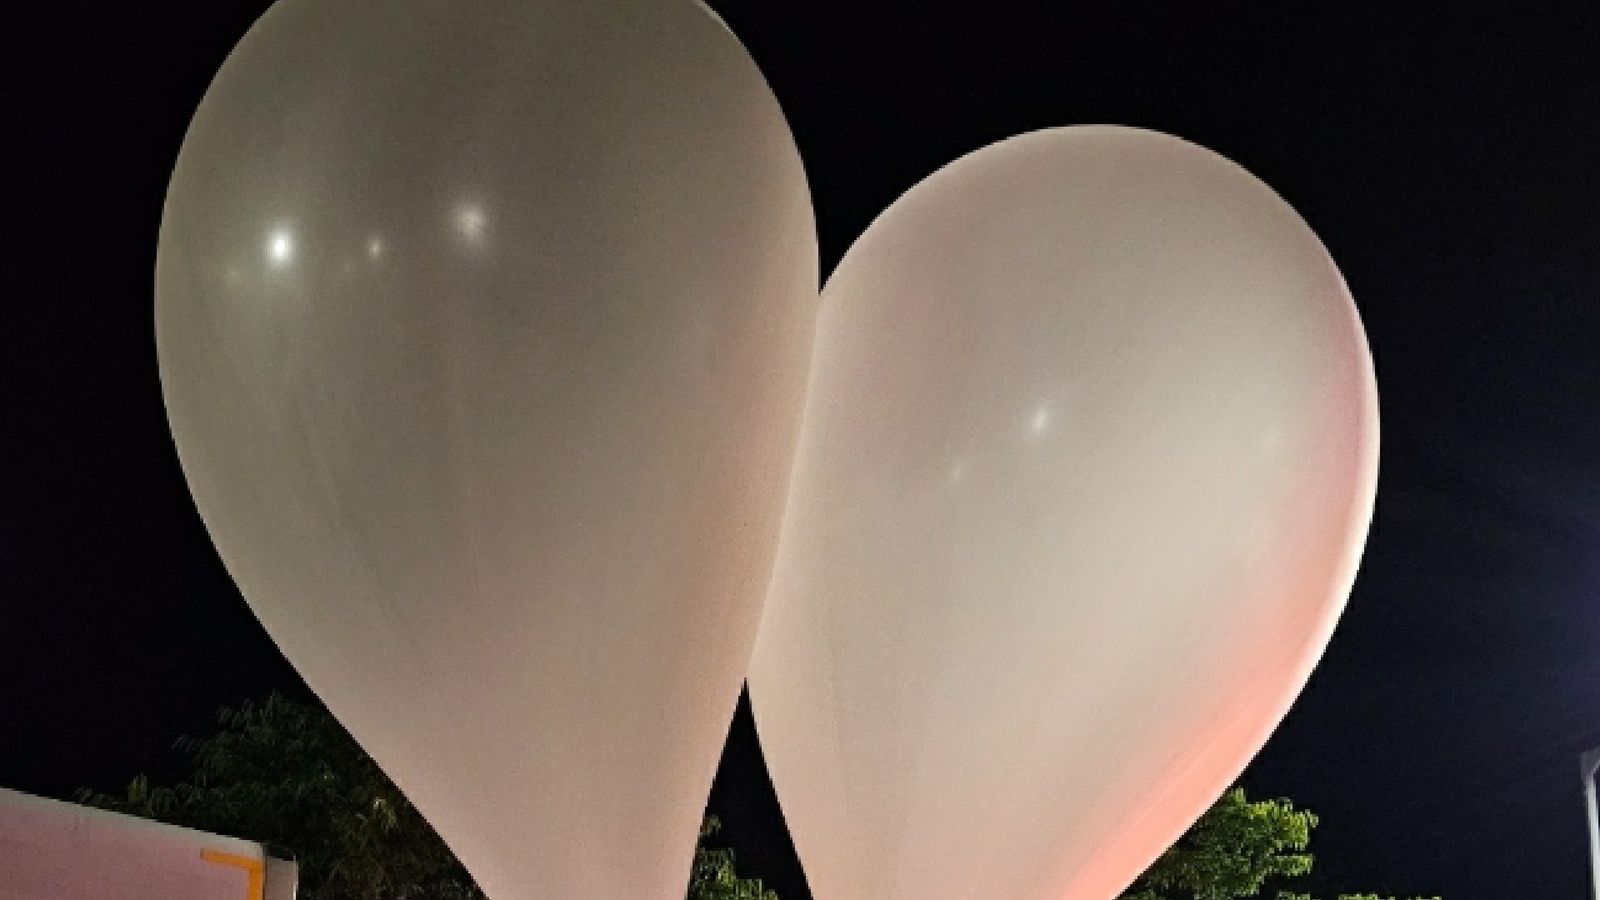 Two balloons carrying bags of poo in an image taken in South Korea